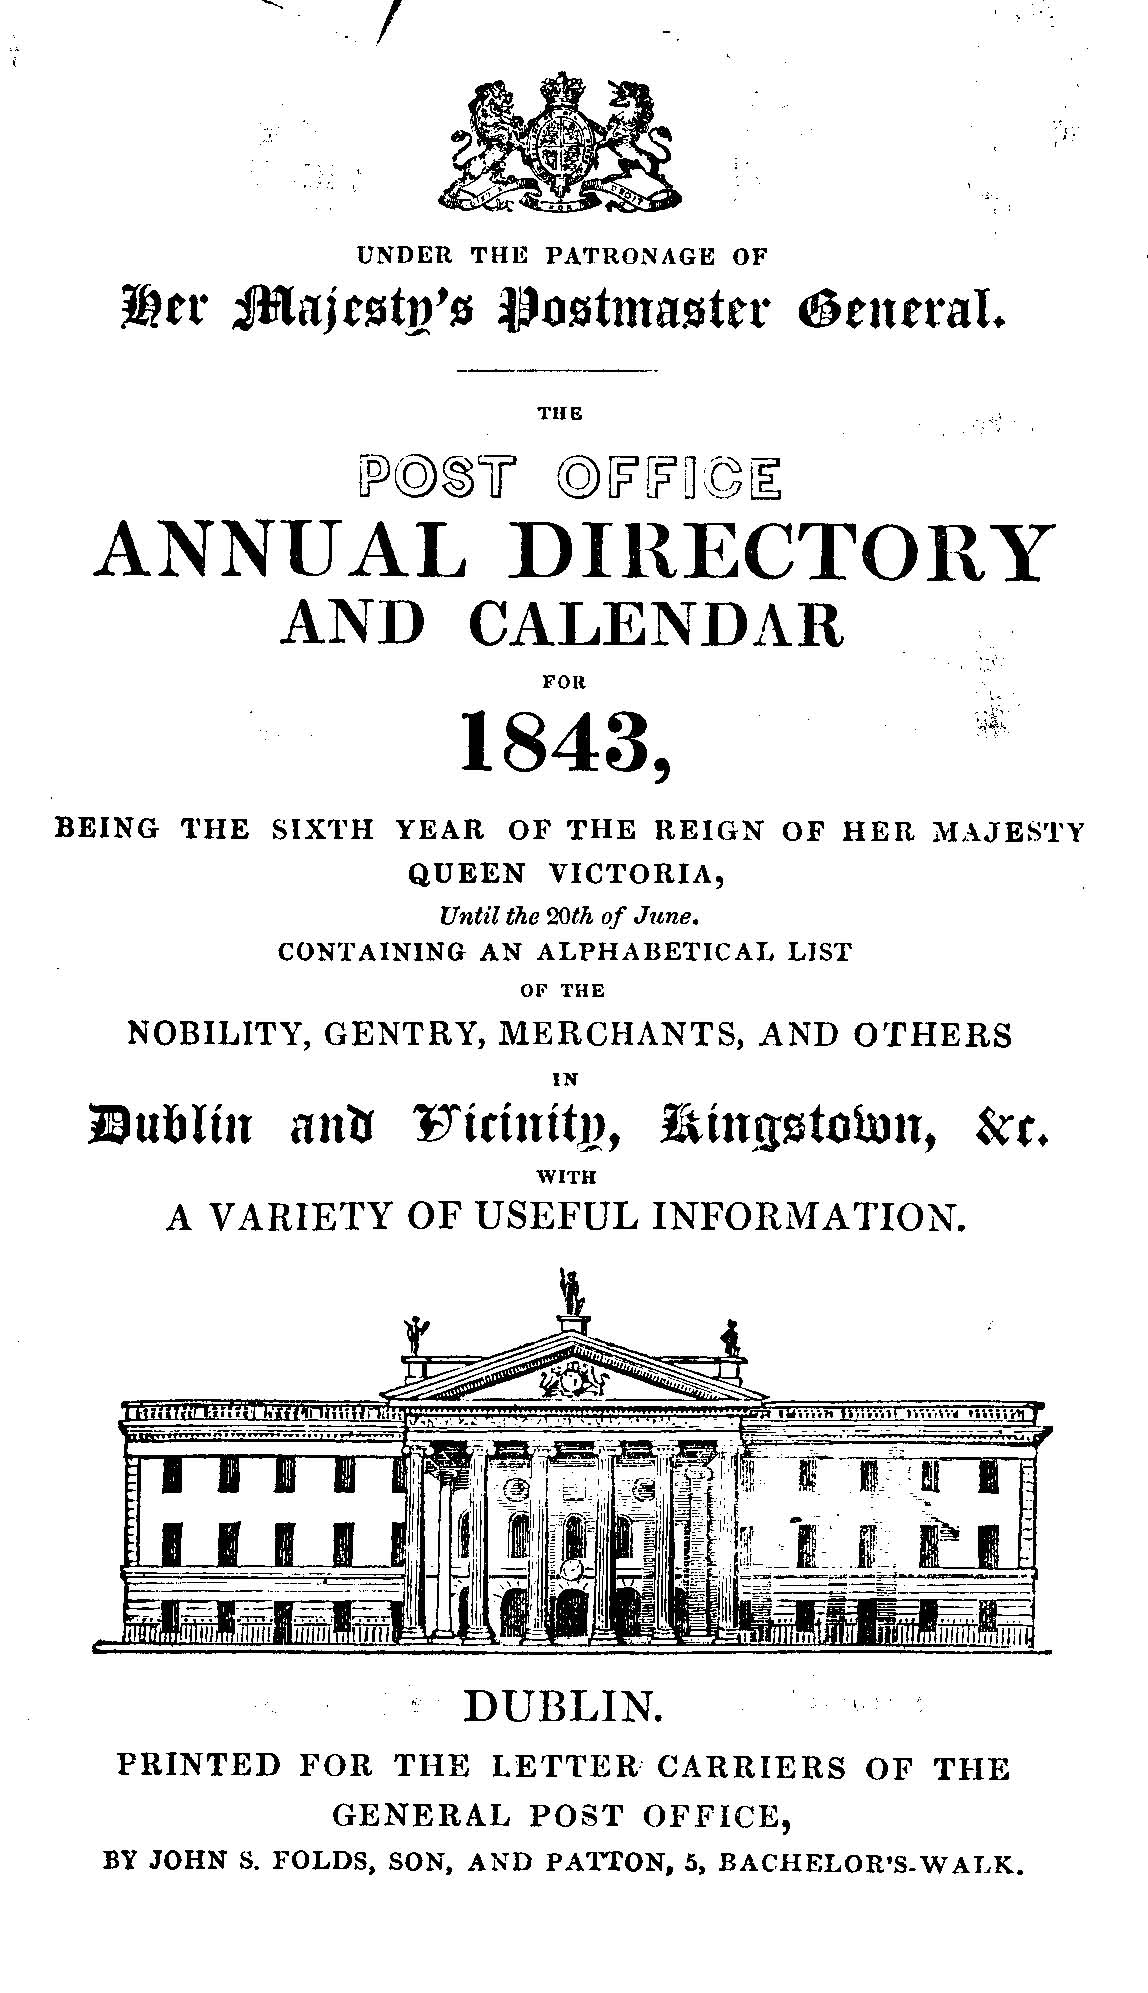 The Post Office Annual Directory and Calendar for 1843, Dublin - Irish ...